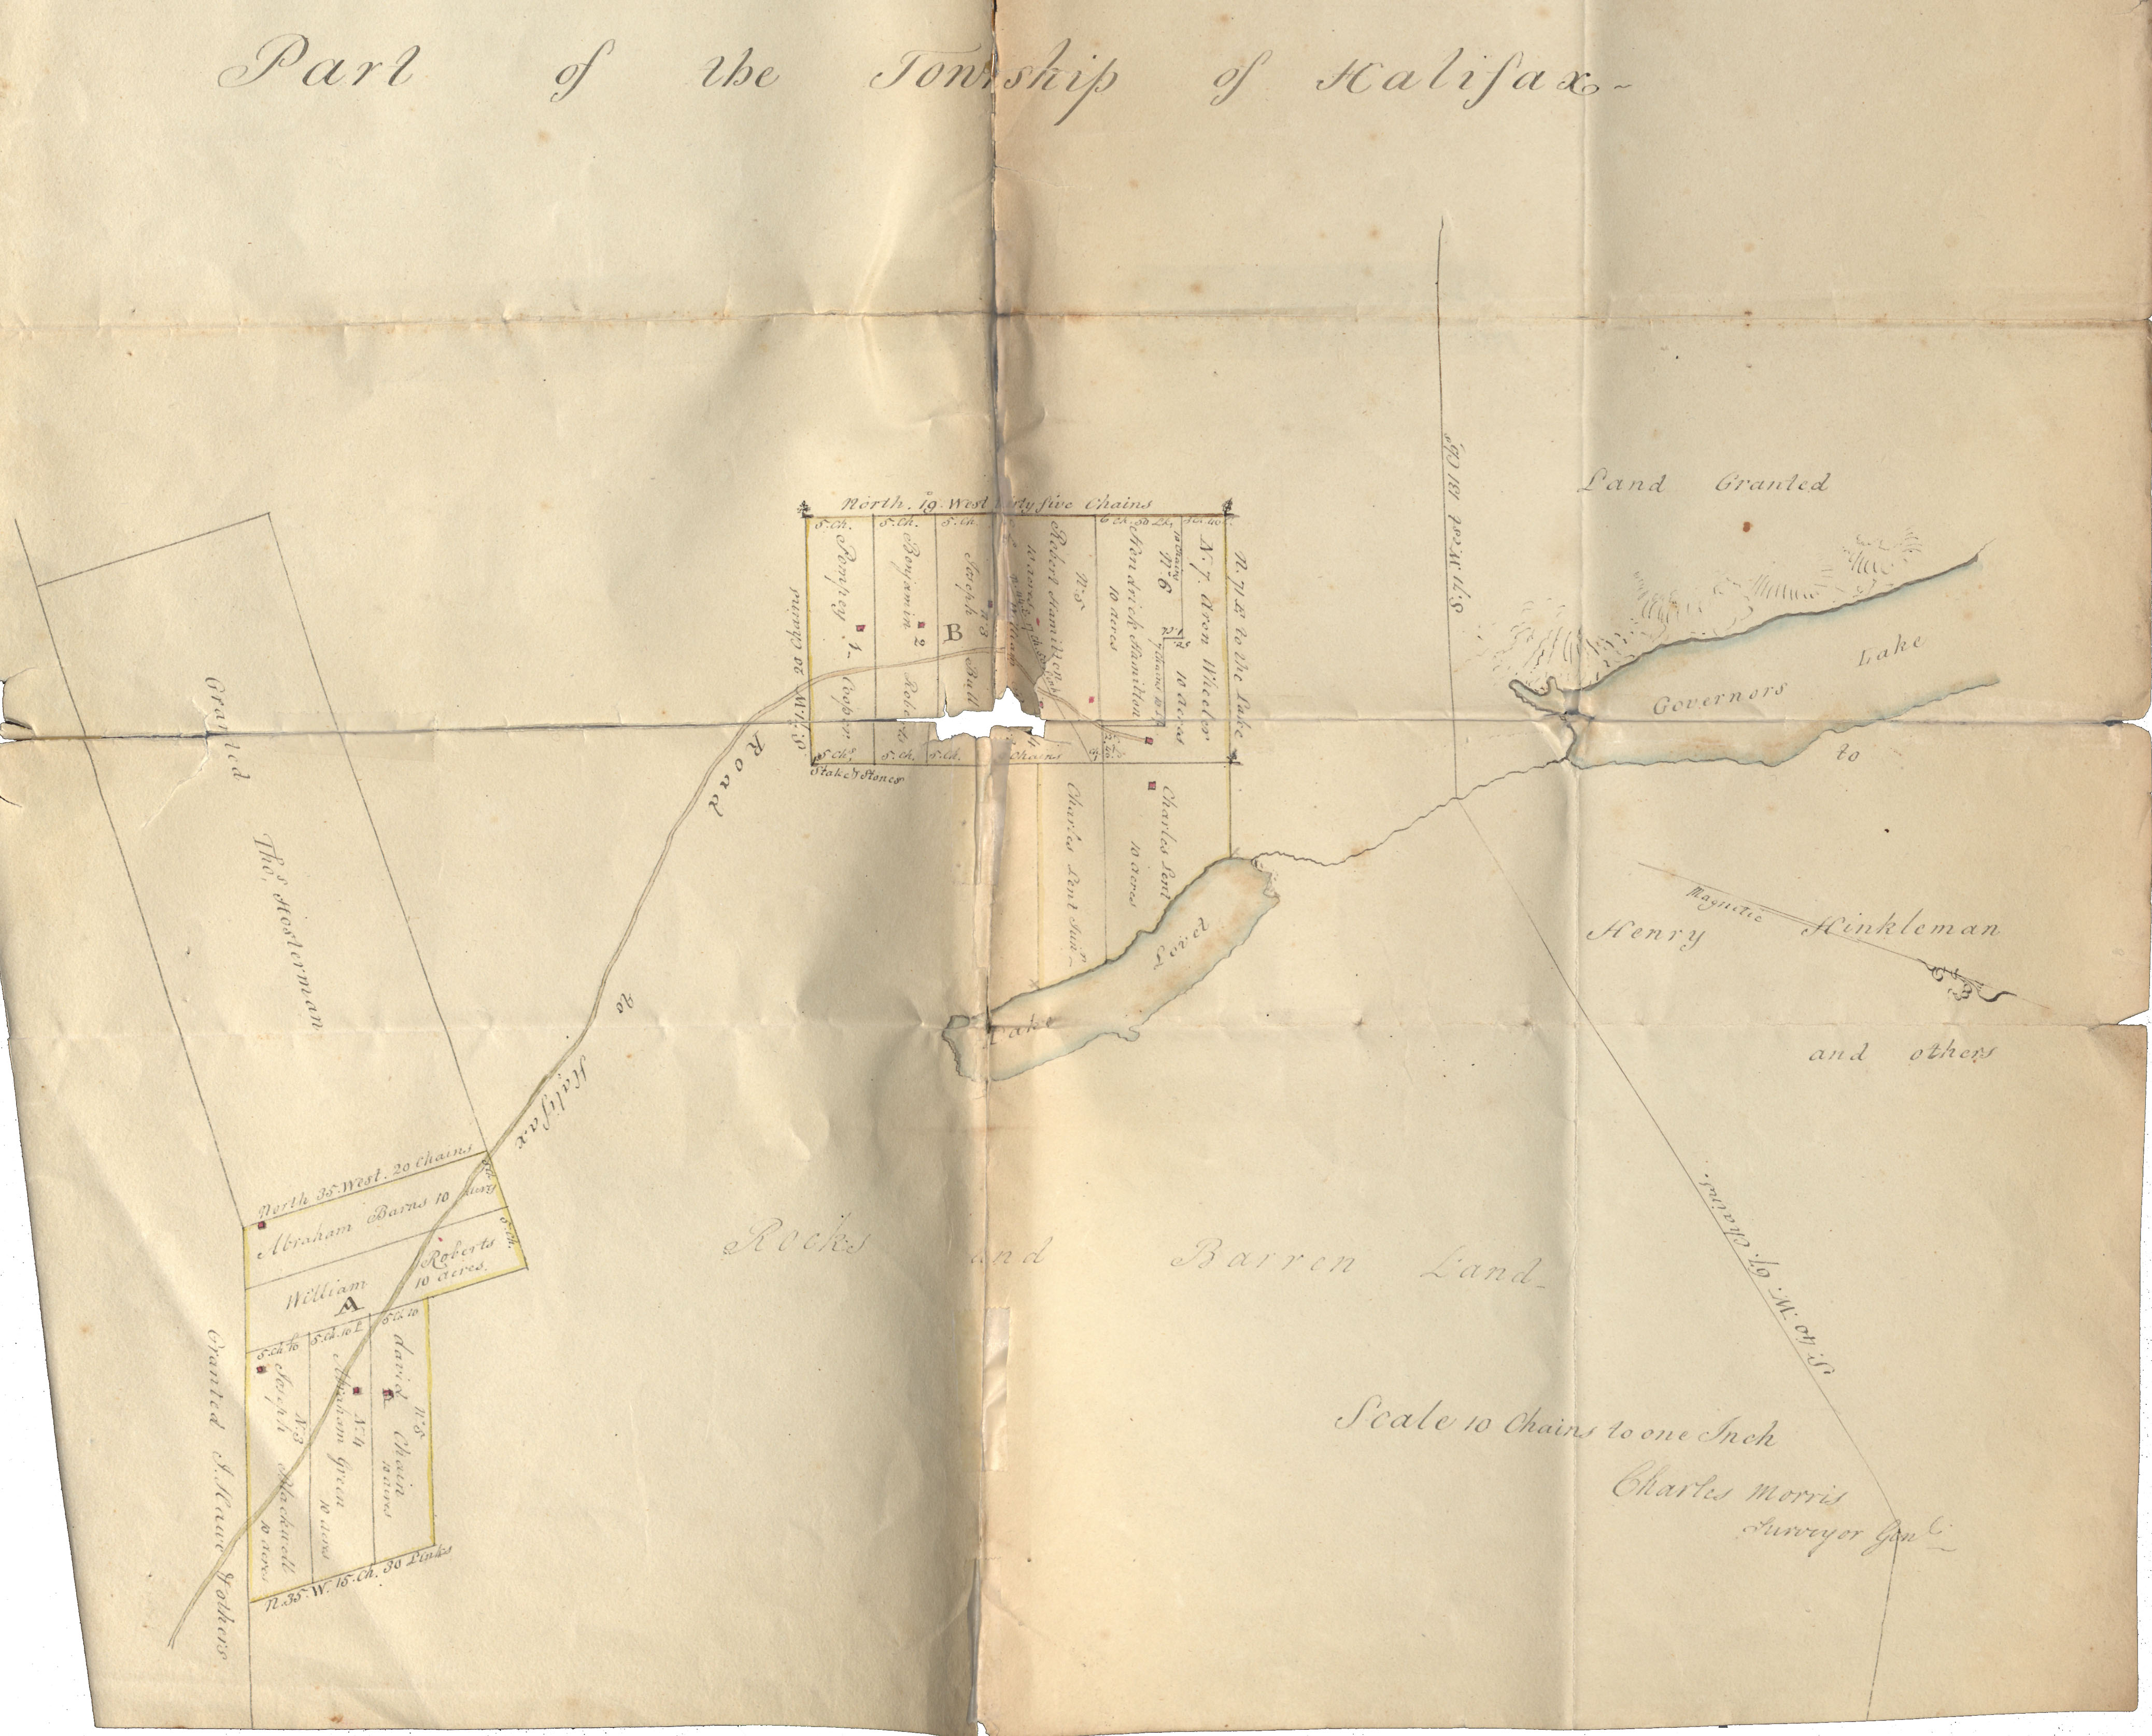 Appendix 29: Plan of Part of the Township of Halifax